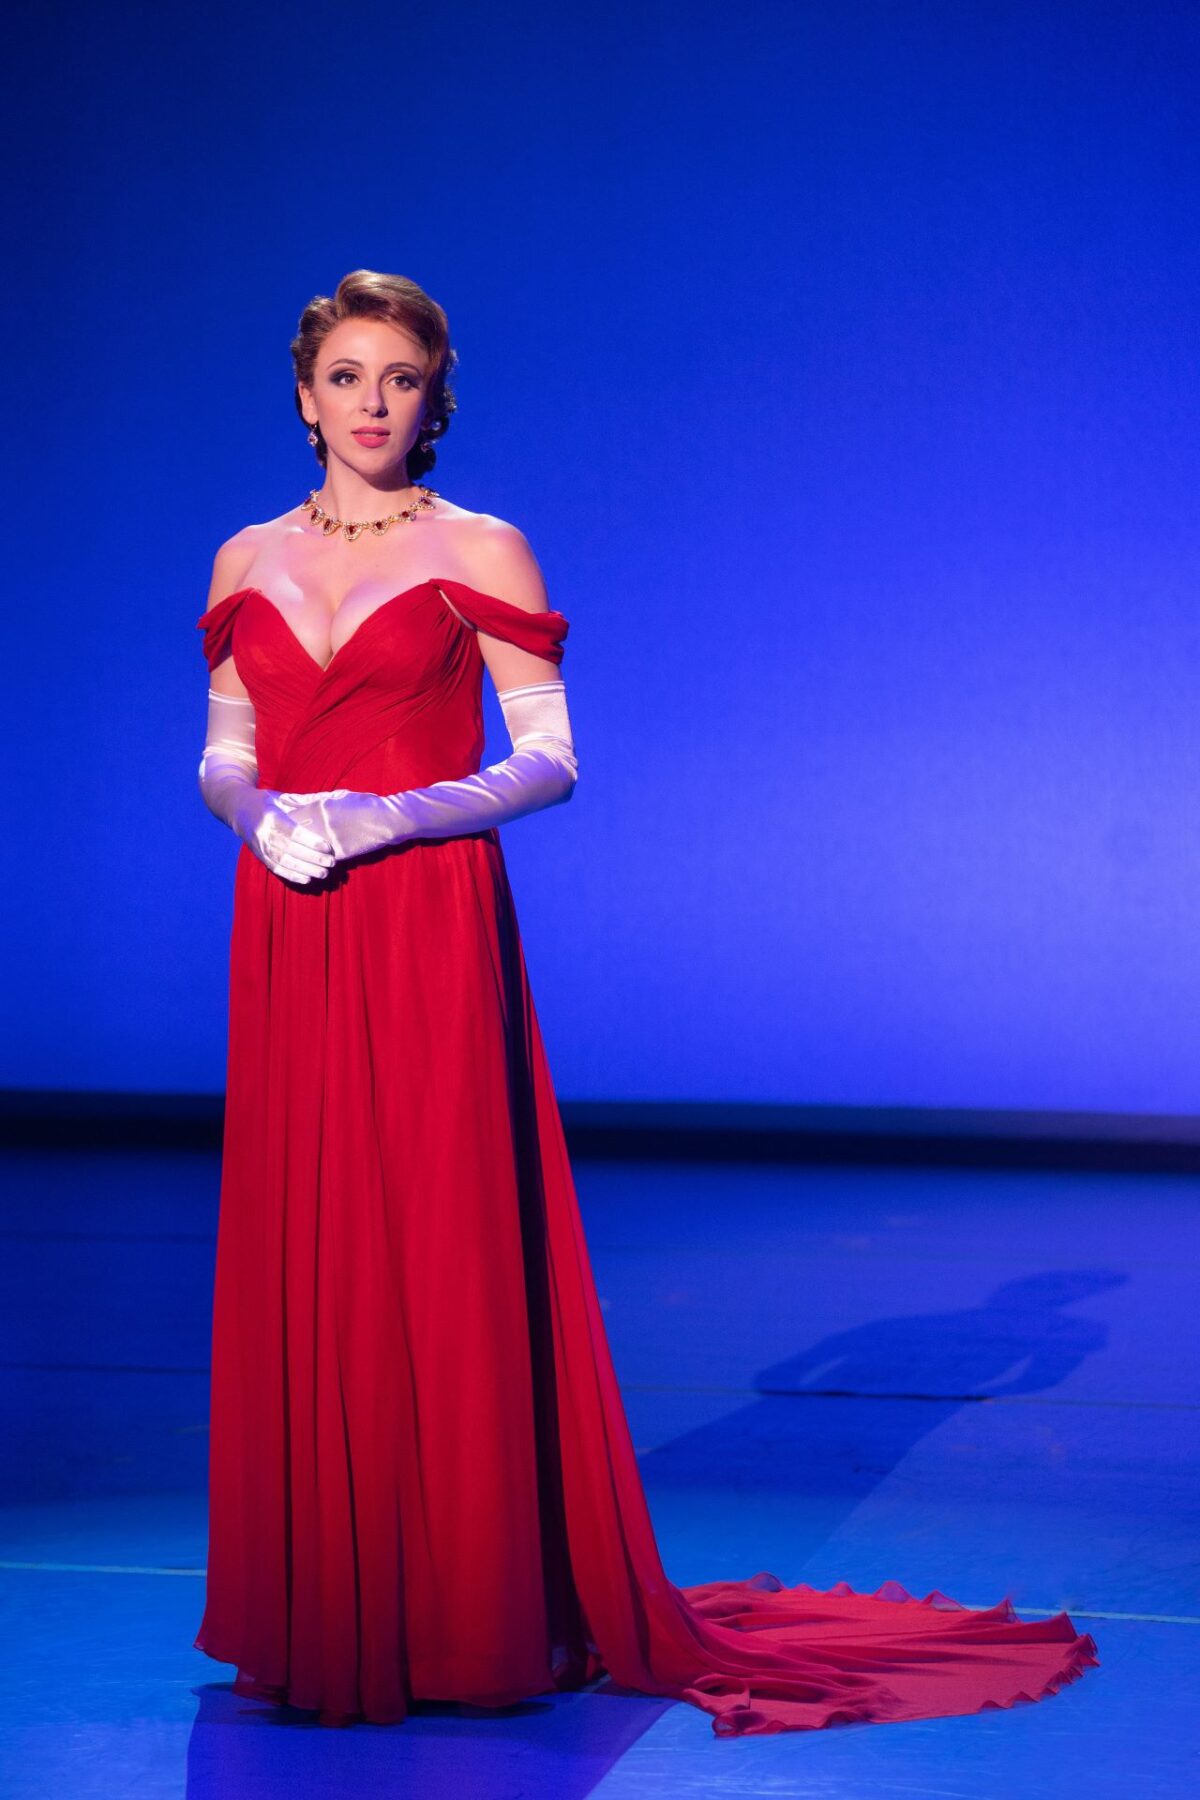 Segerstrom Center for the Arts - PRETTY WOMAN: THE MUSICAL - Olivia Valli – Credit: Matthew Murphy for MurphyMade